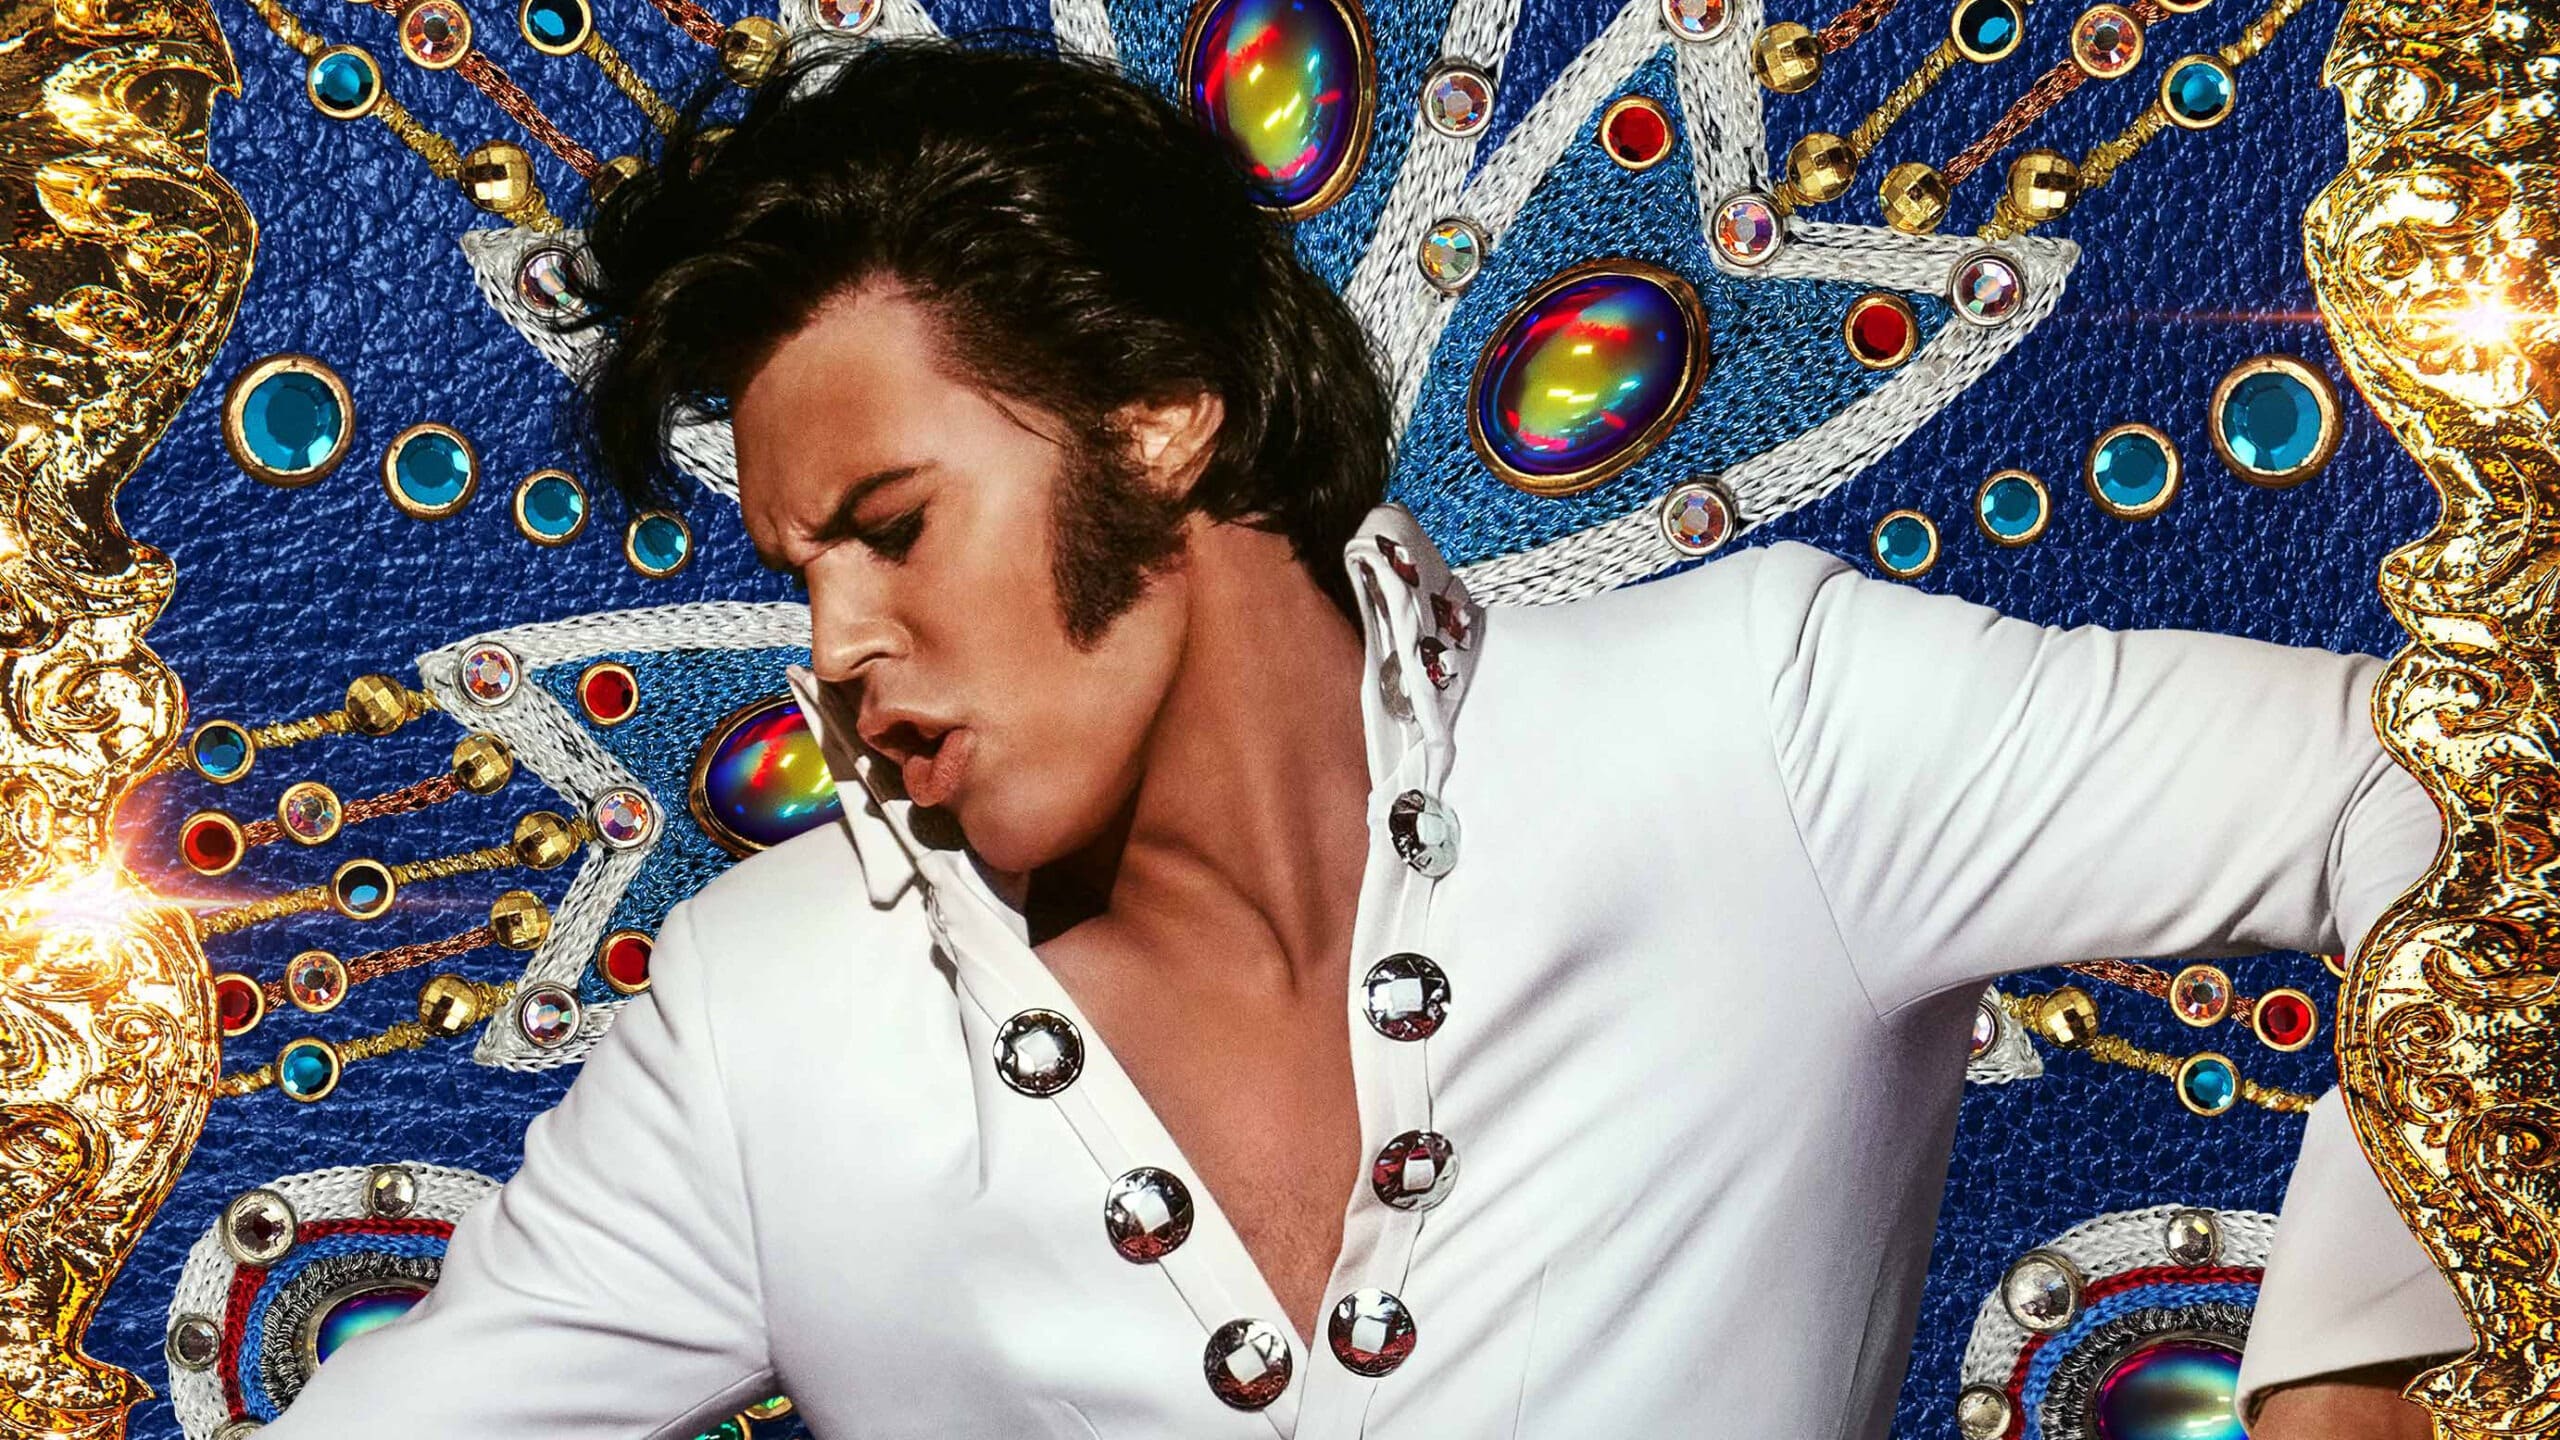 Top 10 Elvis Presley Hits You Can't Help But Sing Along To